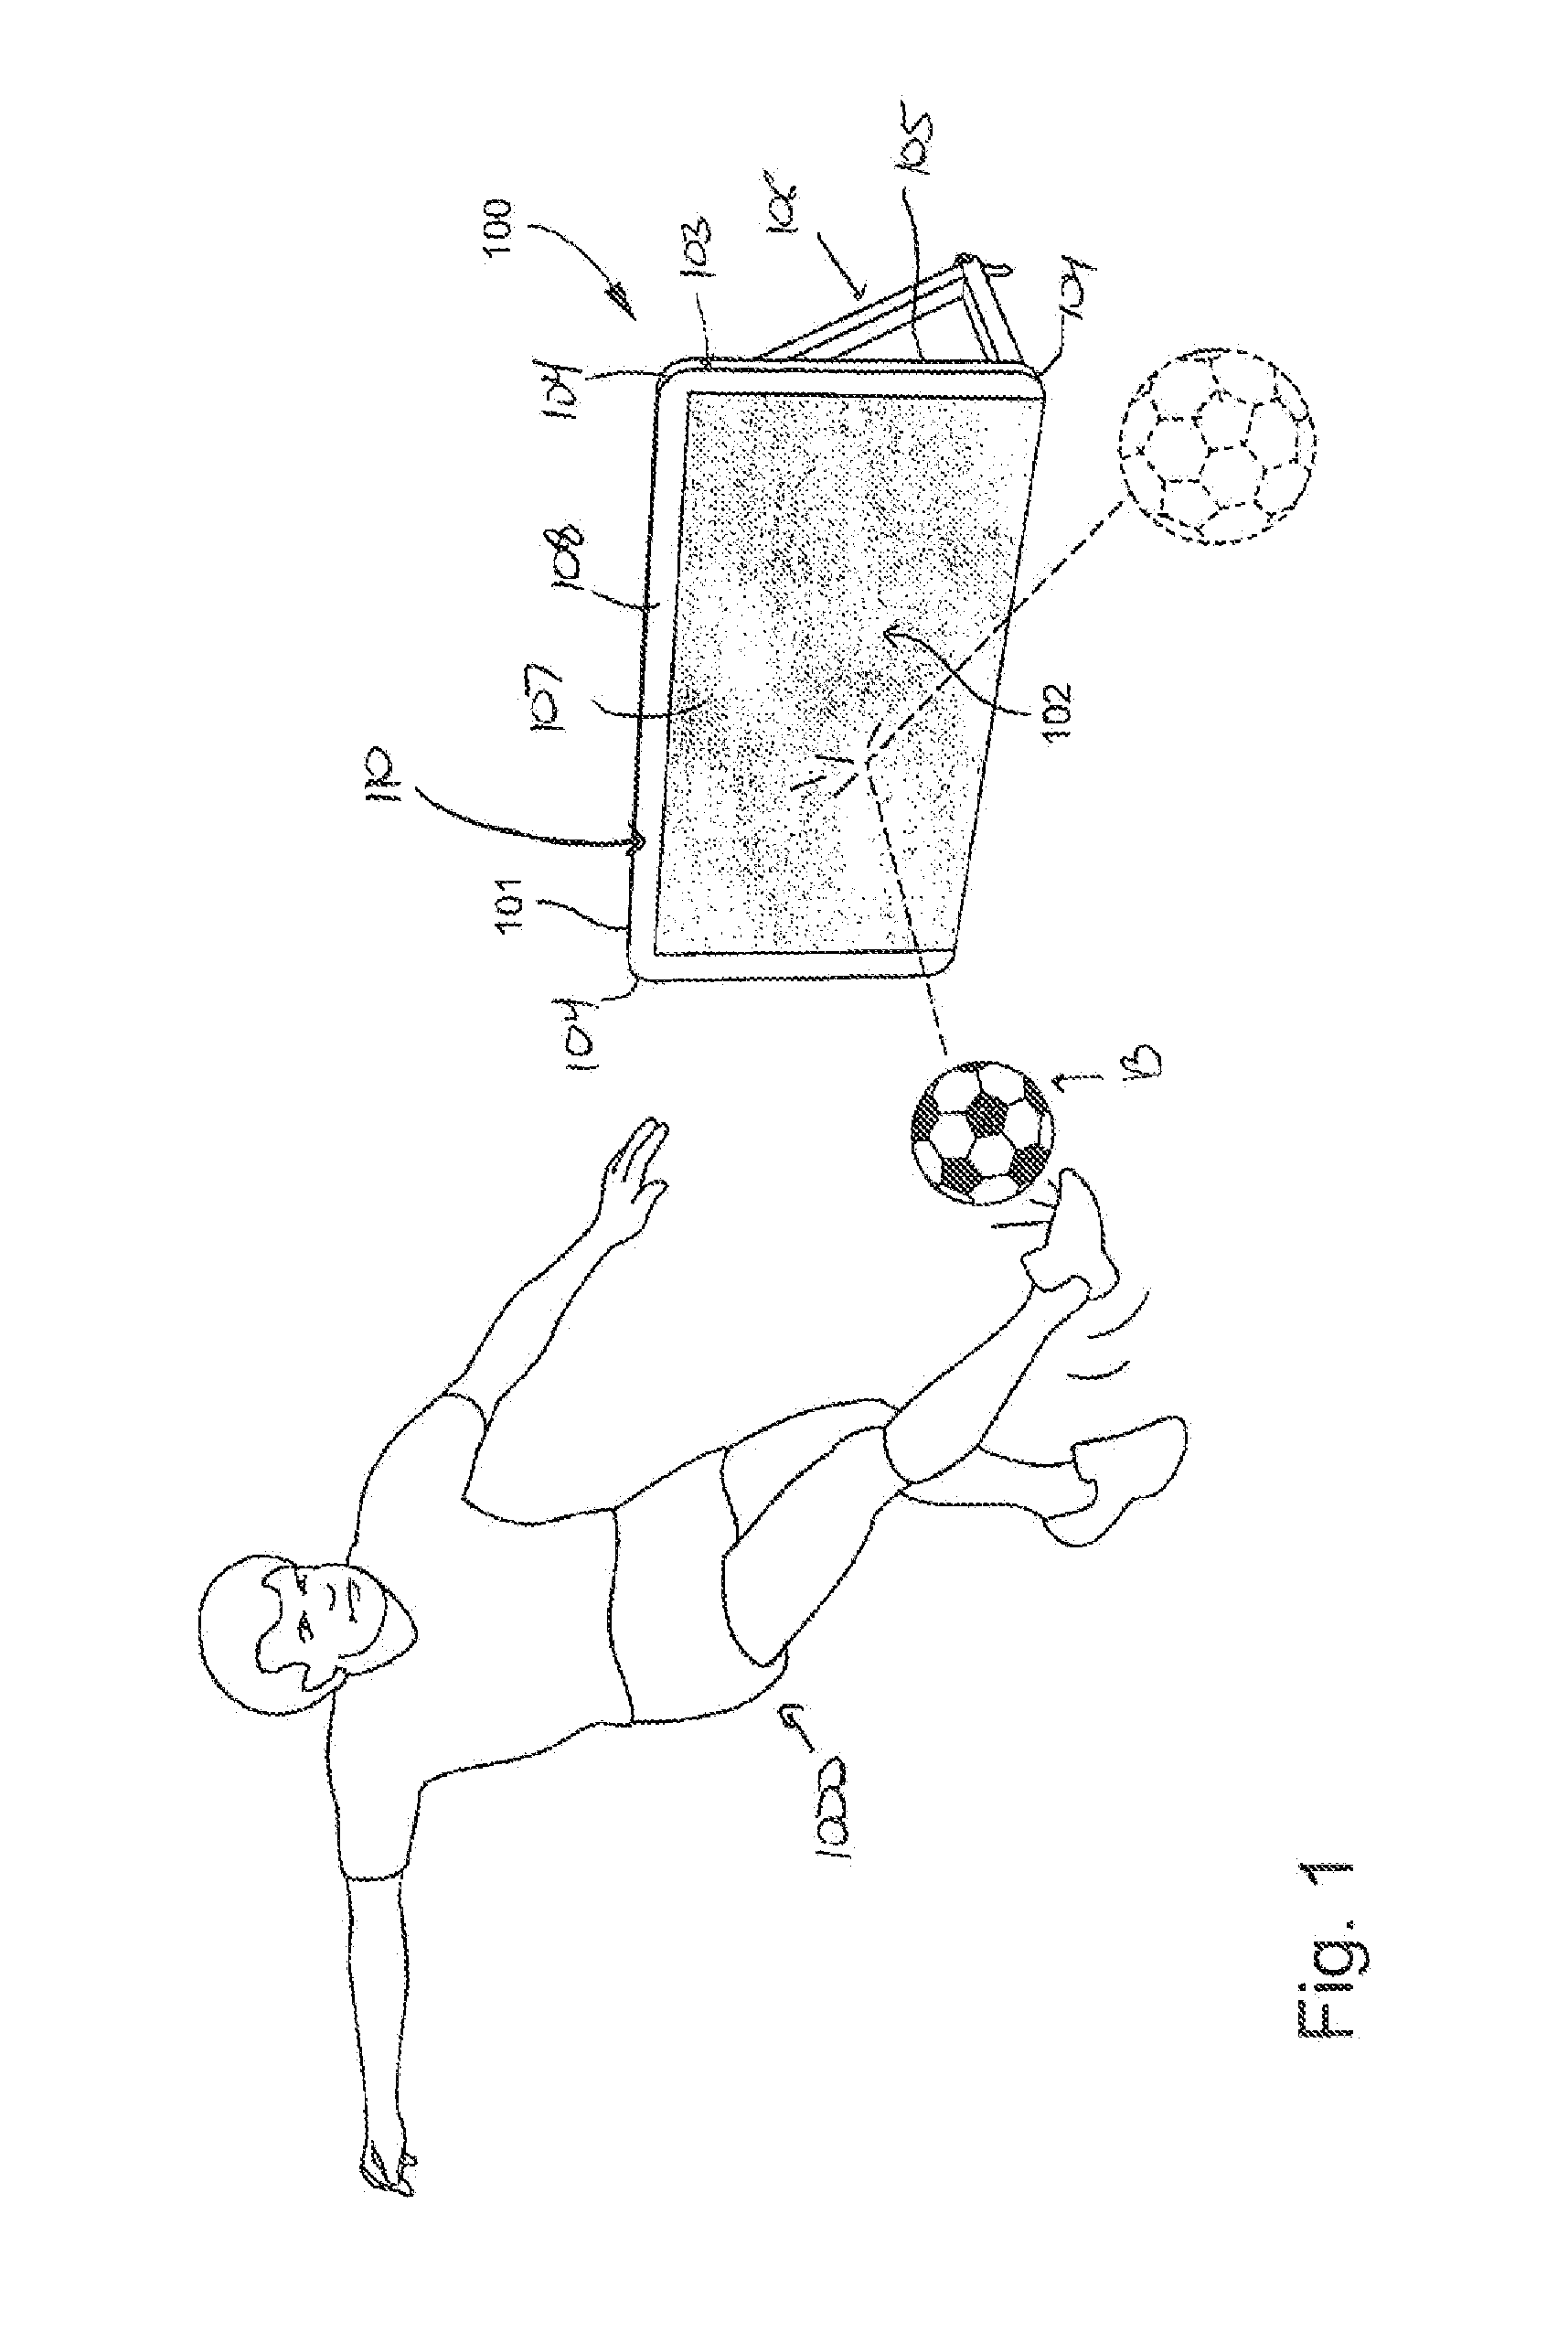 Soccer training device, method of use and system